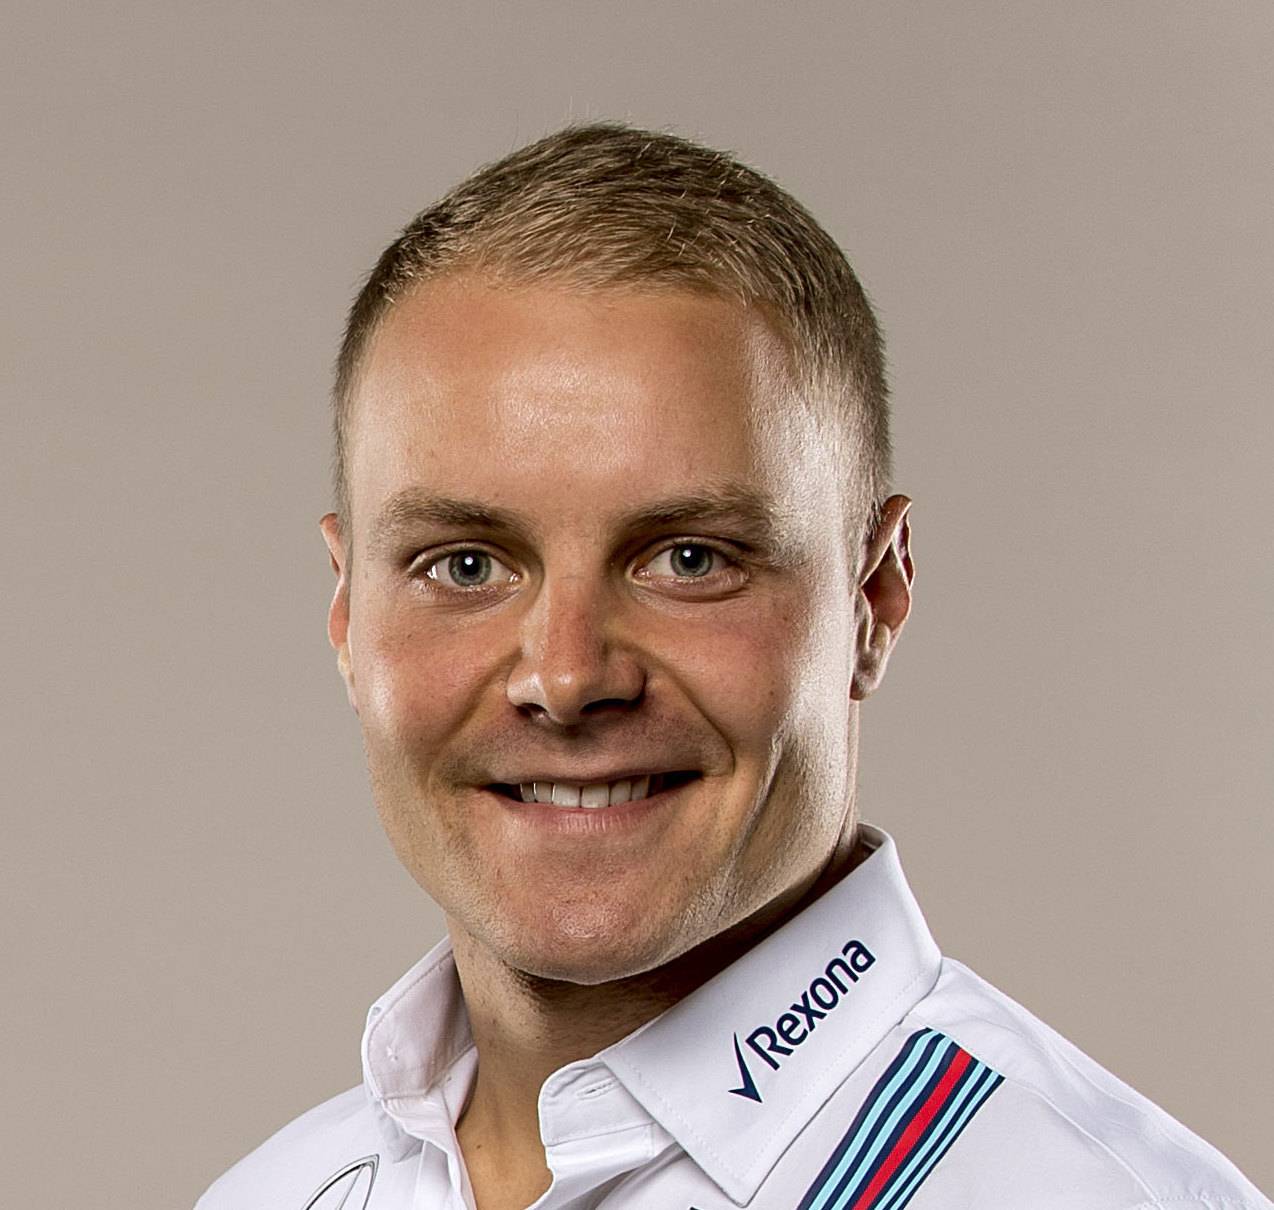 Bottas smiling ear-to-ear every day now